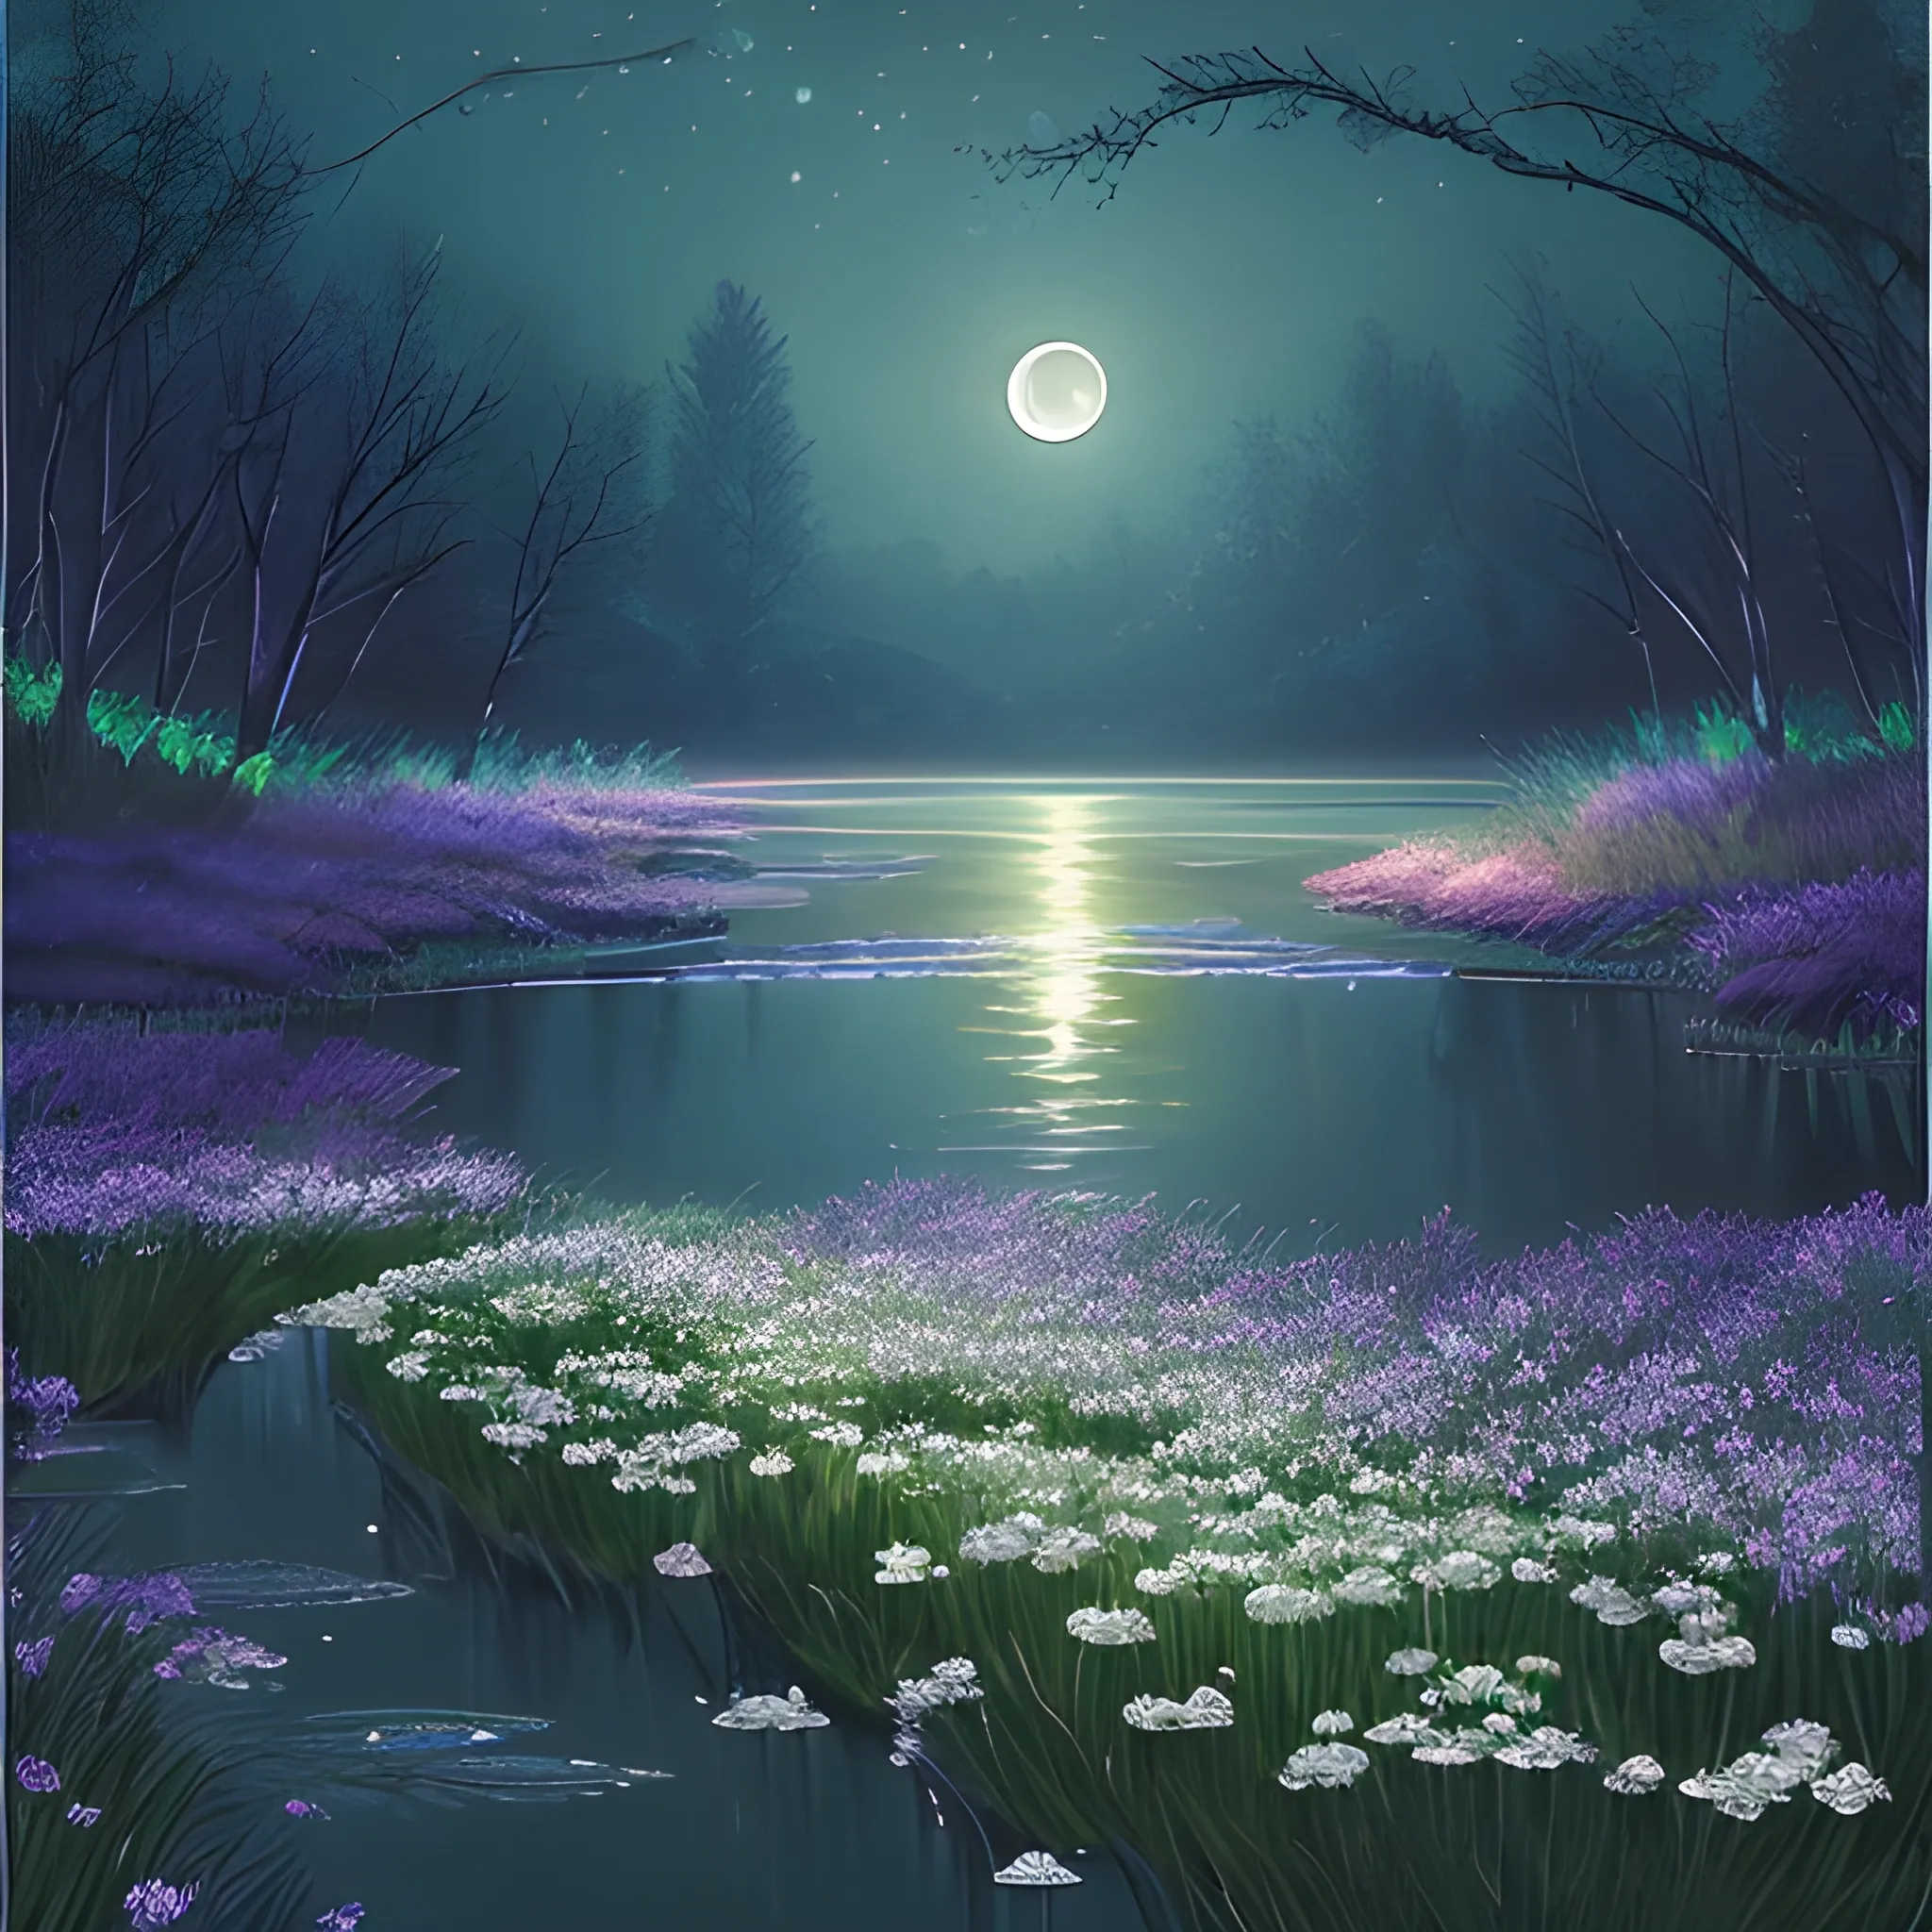 A digital art piece of lily of the valley flowers under the moonlight along a river's edge. Moon reflecting on the water, cool and mystical ambiance. Created Using: digital art, moonlit scene, cool color palette, luminous reflections, night sky, mystical atmosphere, detailed flowers, serene river landscape, Oil Painting